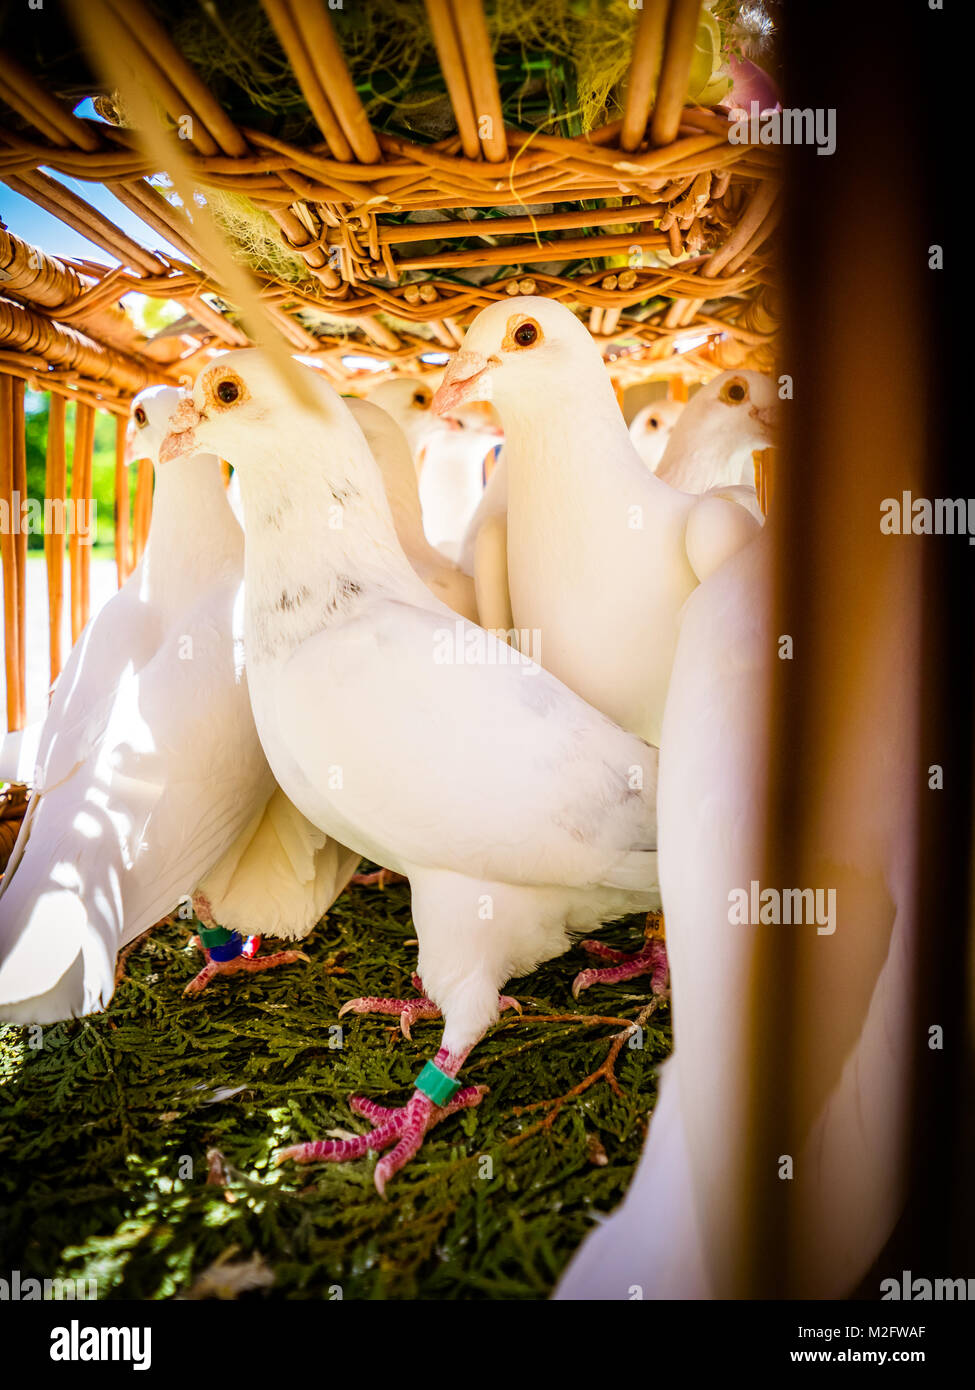 The white doves in the basket Stock Photo